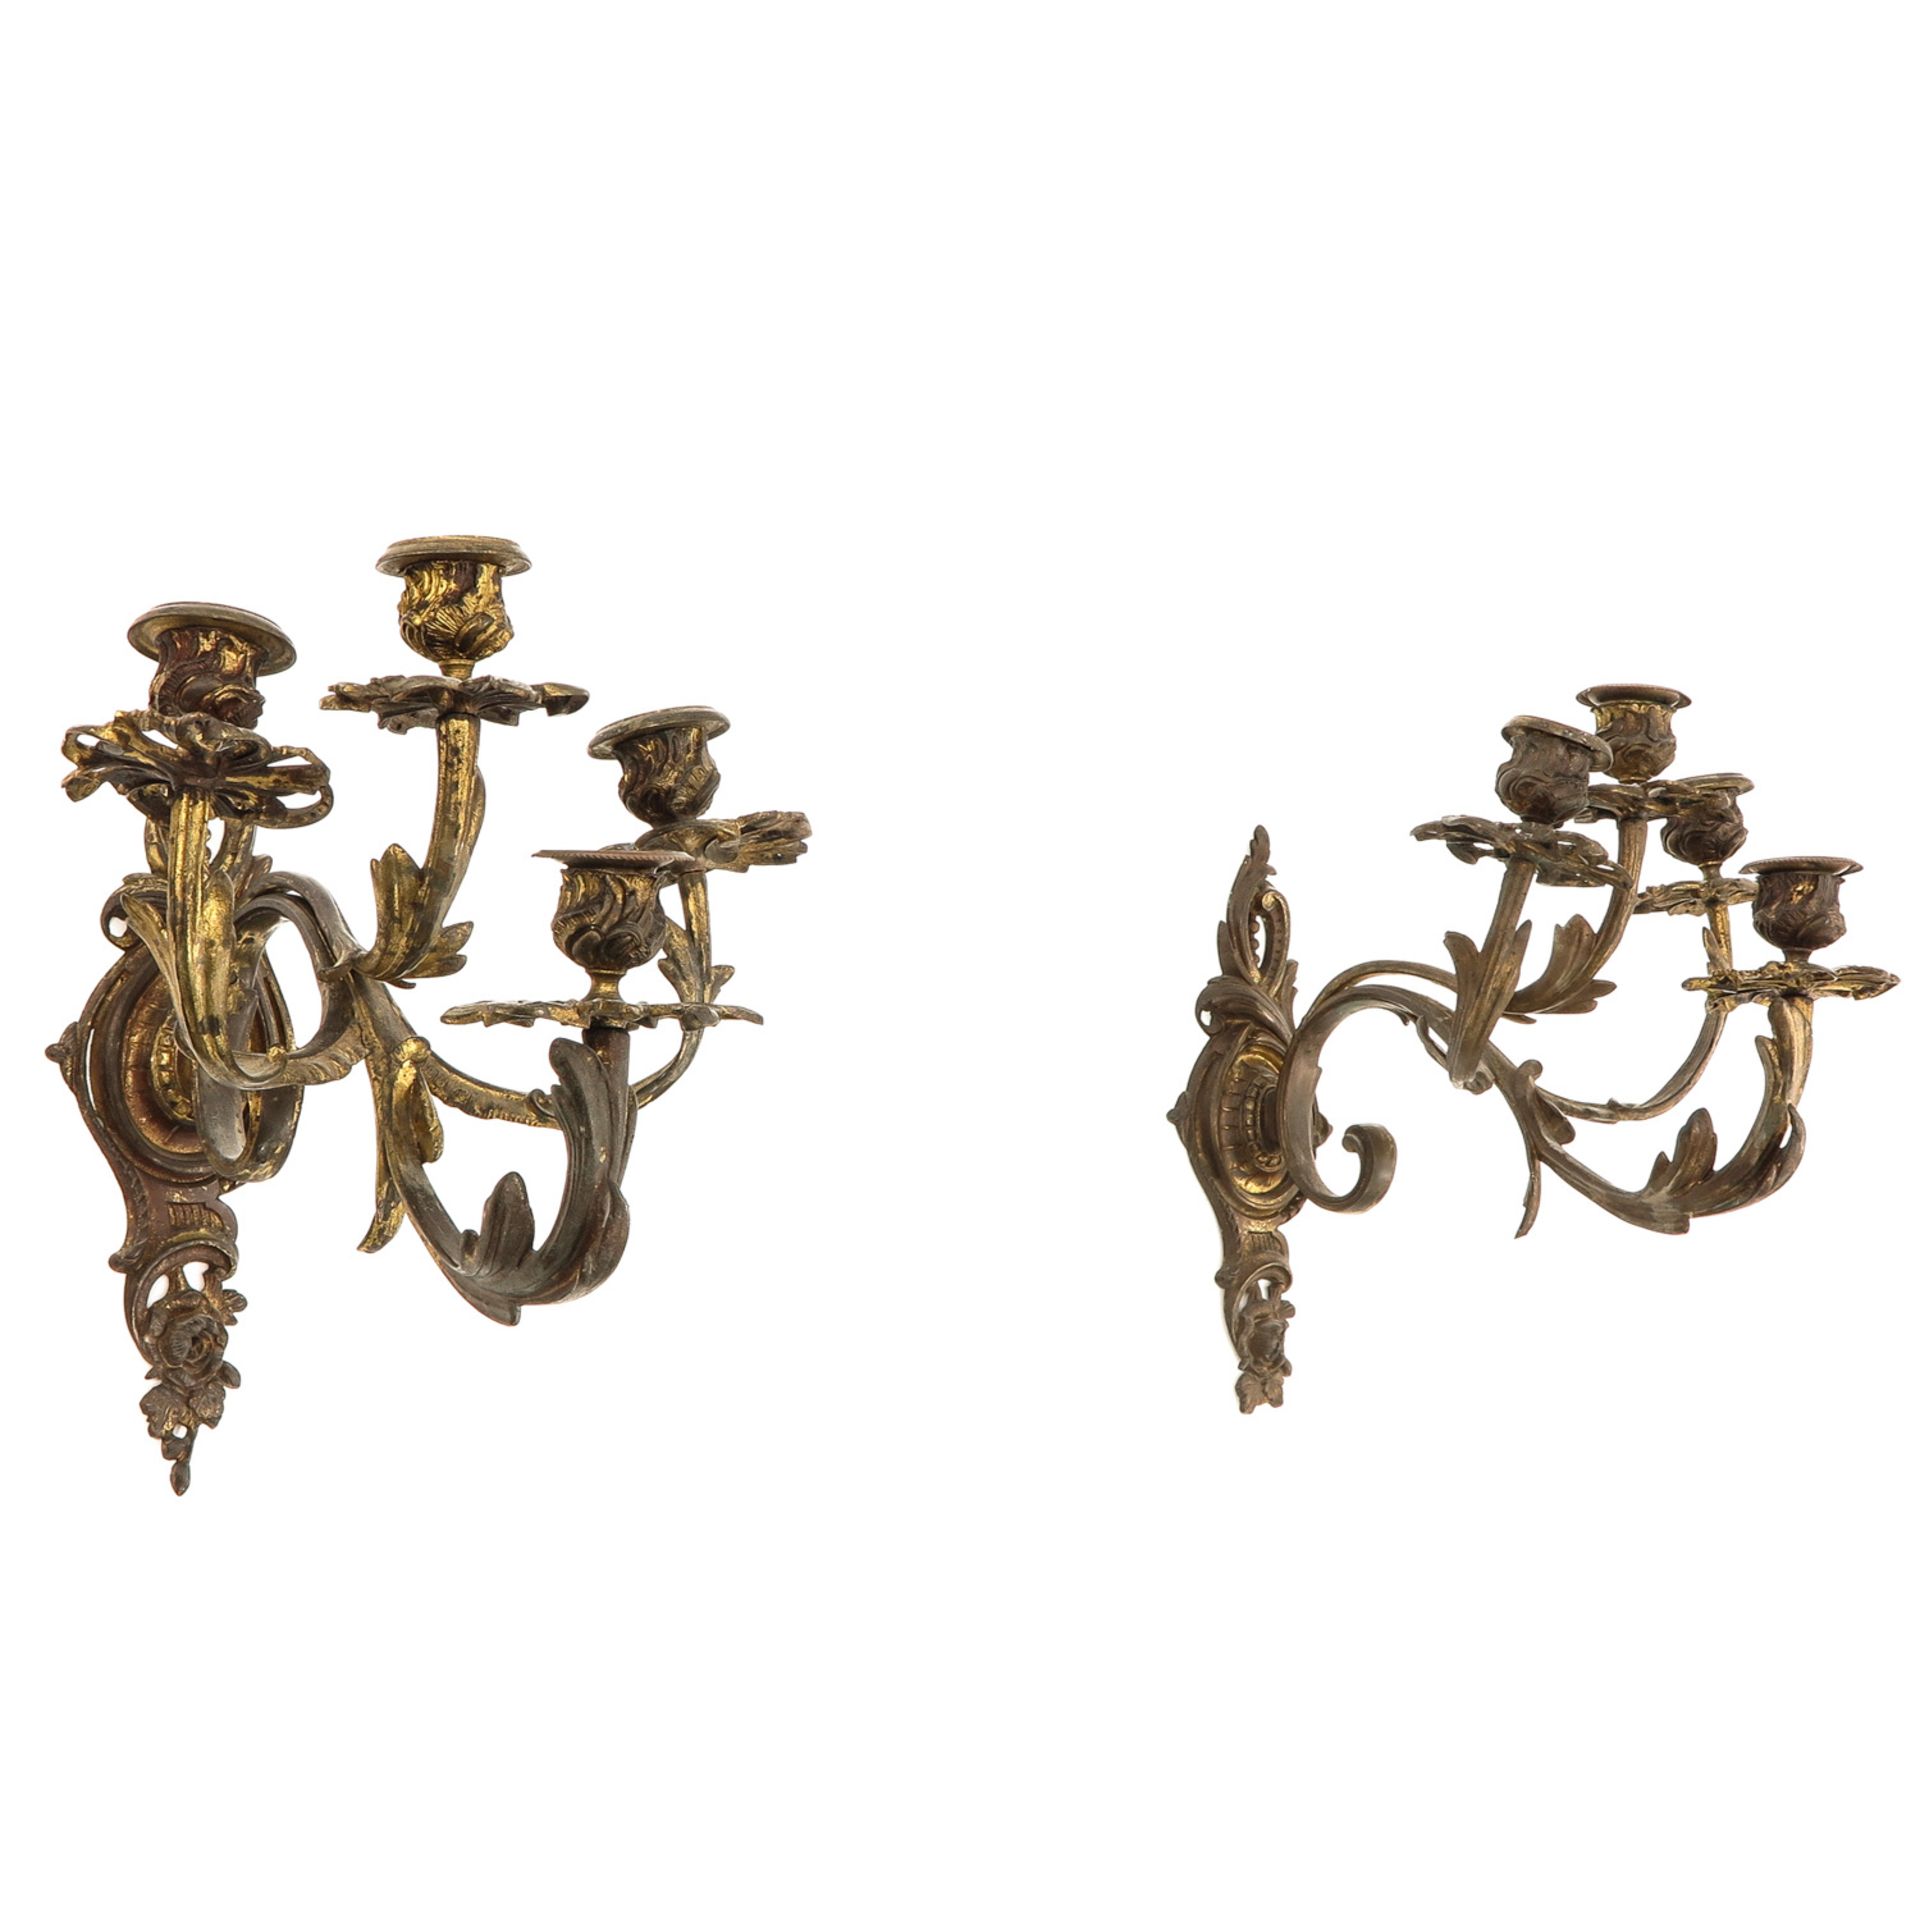 A Pair of 19th Century Bronze Candlesticks - Image 2 of 6